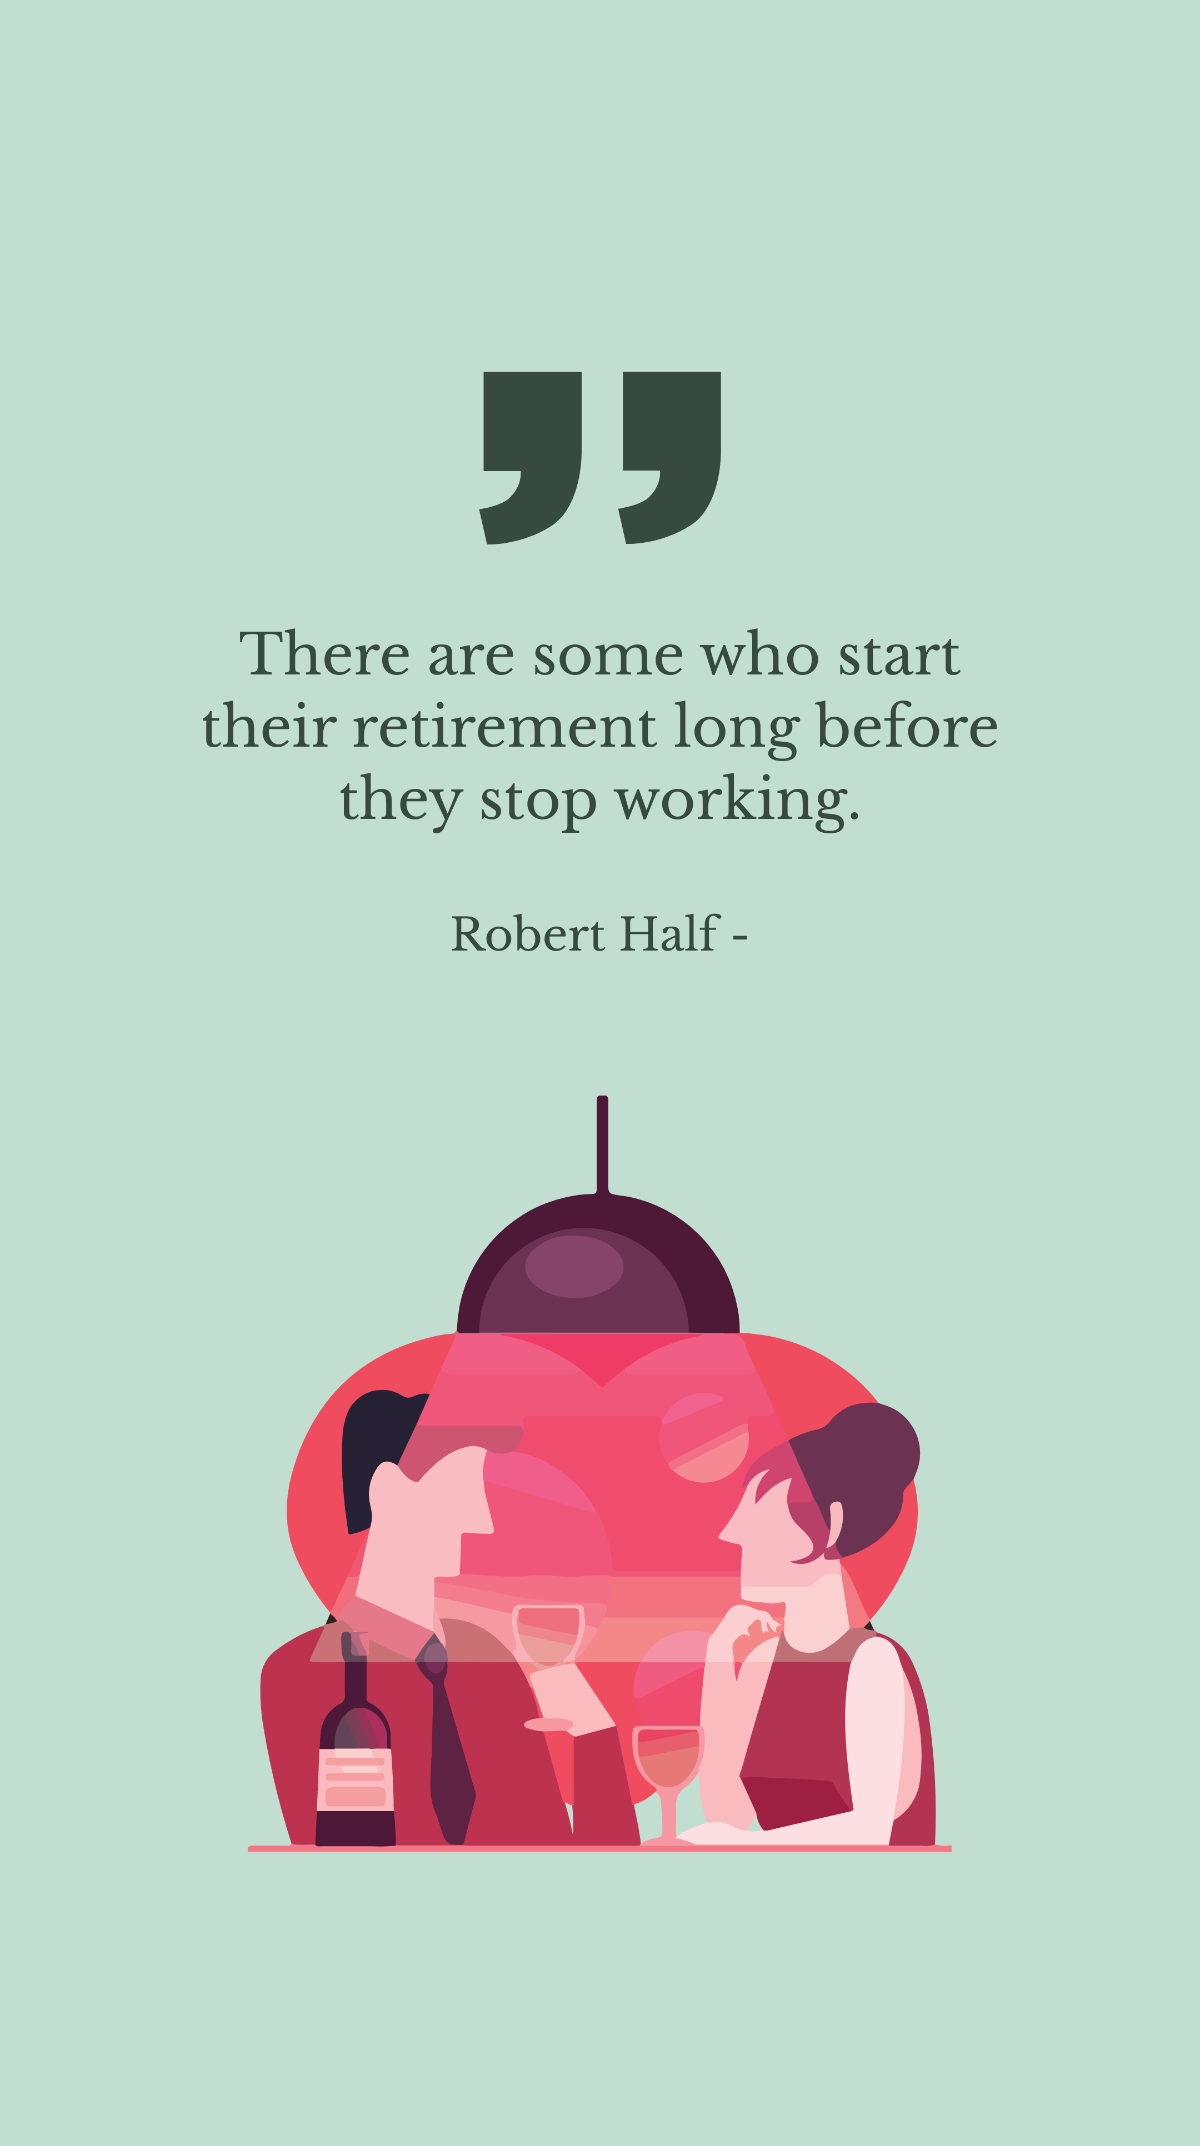 Free Robert Half - There are some who start their retirement long before they stop working. Template